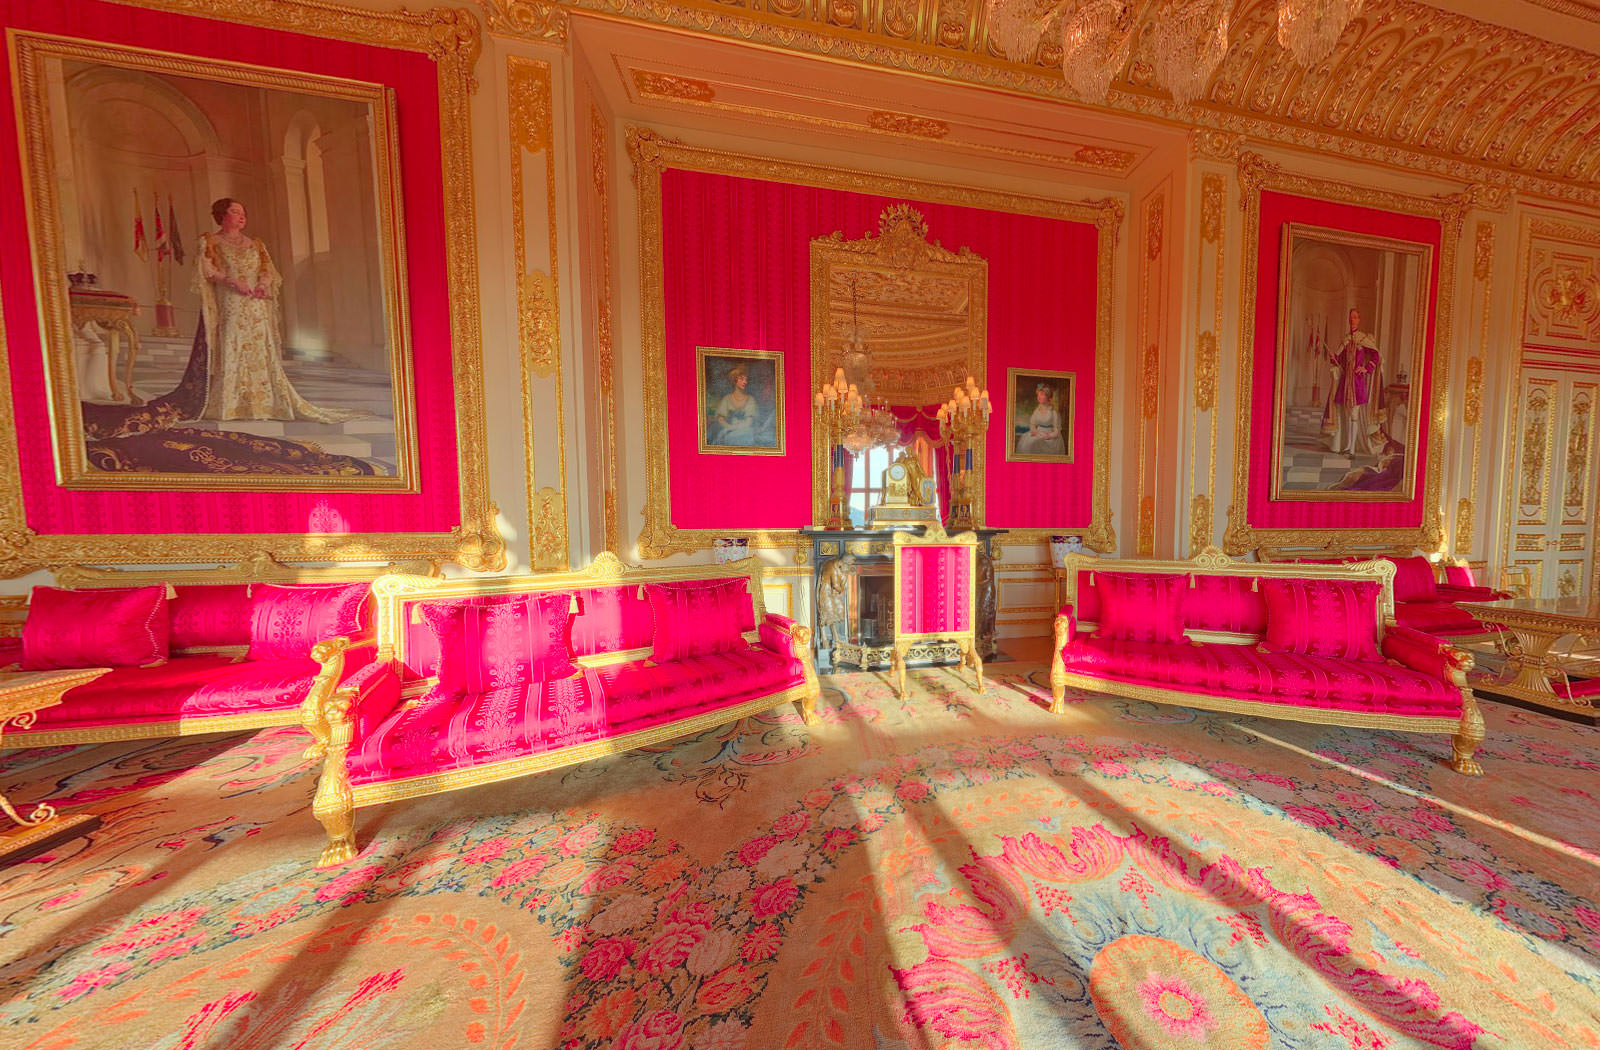 Buckingham Palace and Windsor Castle Virtual Tours launched